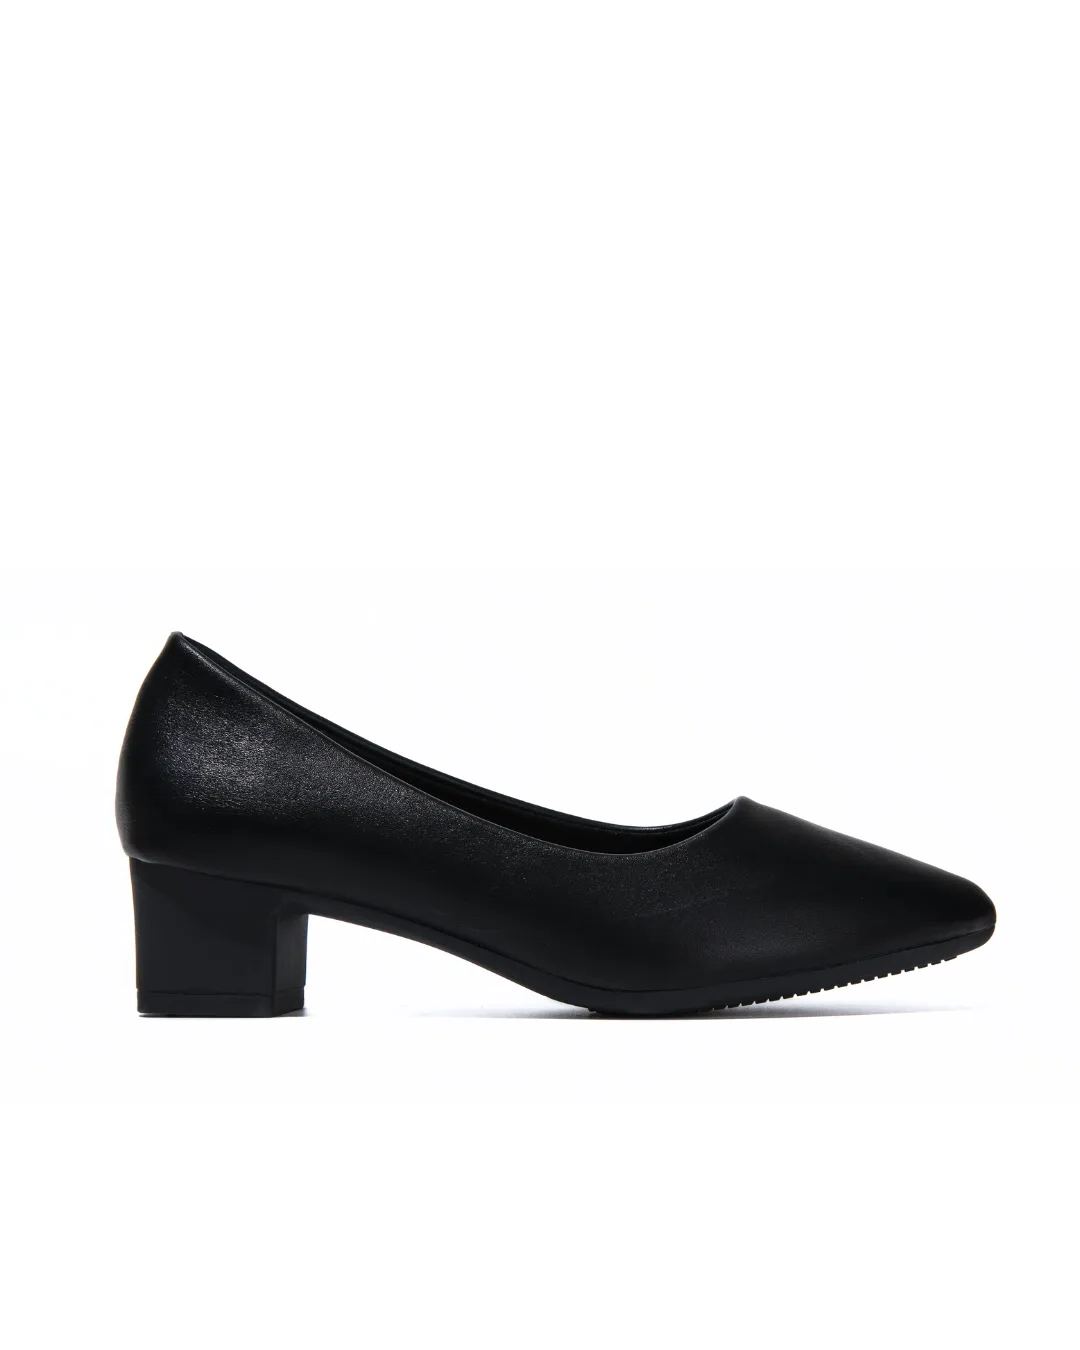 【NEW】Lyden Air-Cushioned Series 4.5cm Mid Heels - Classic Black